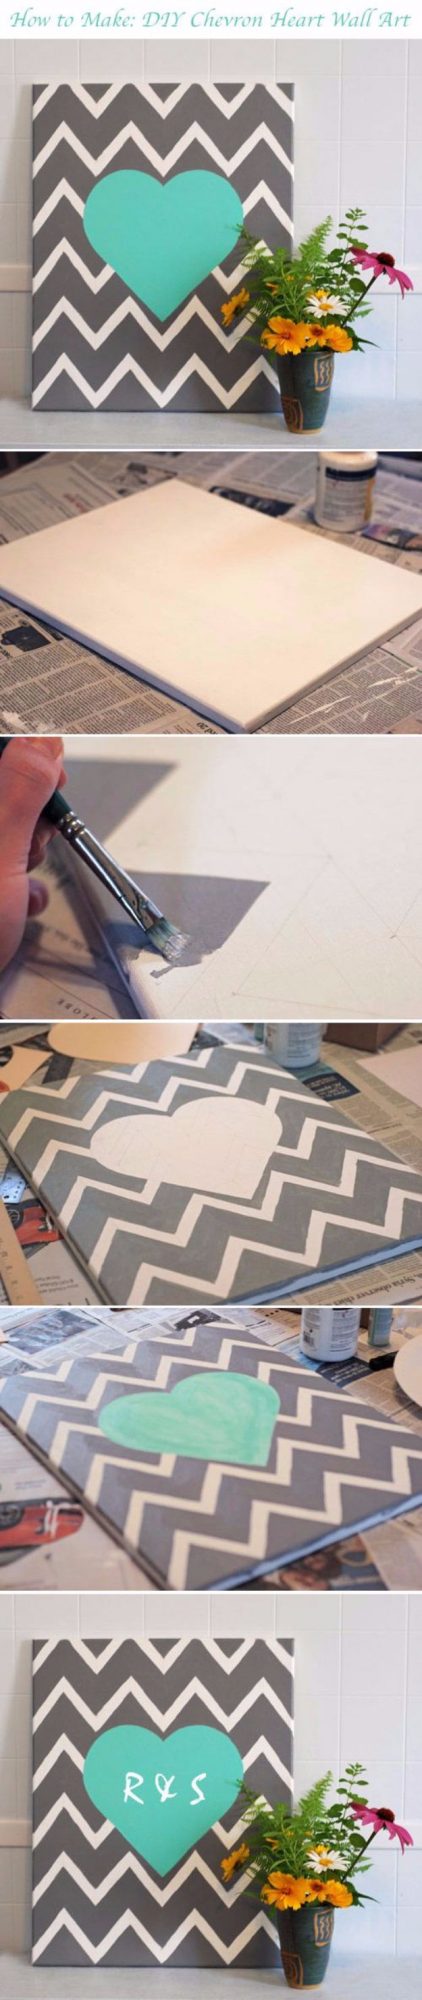 15 Super Easy DIY Canvas Painting Ideas For Artistic Home Decor